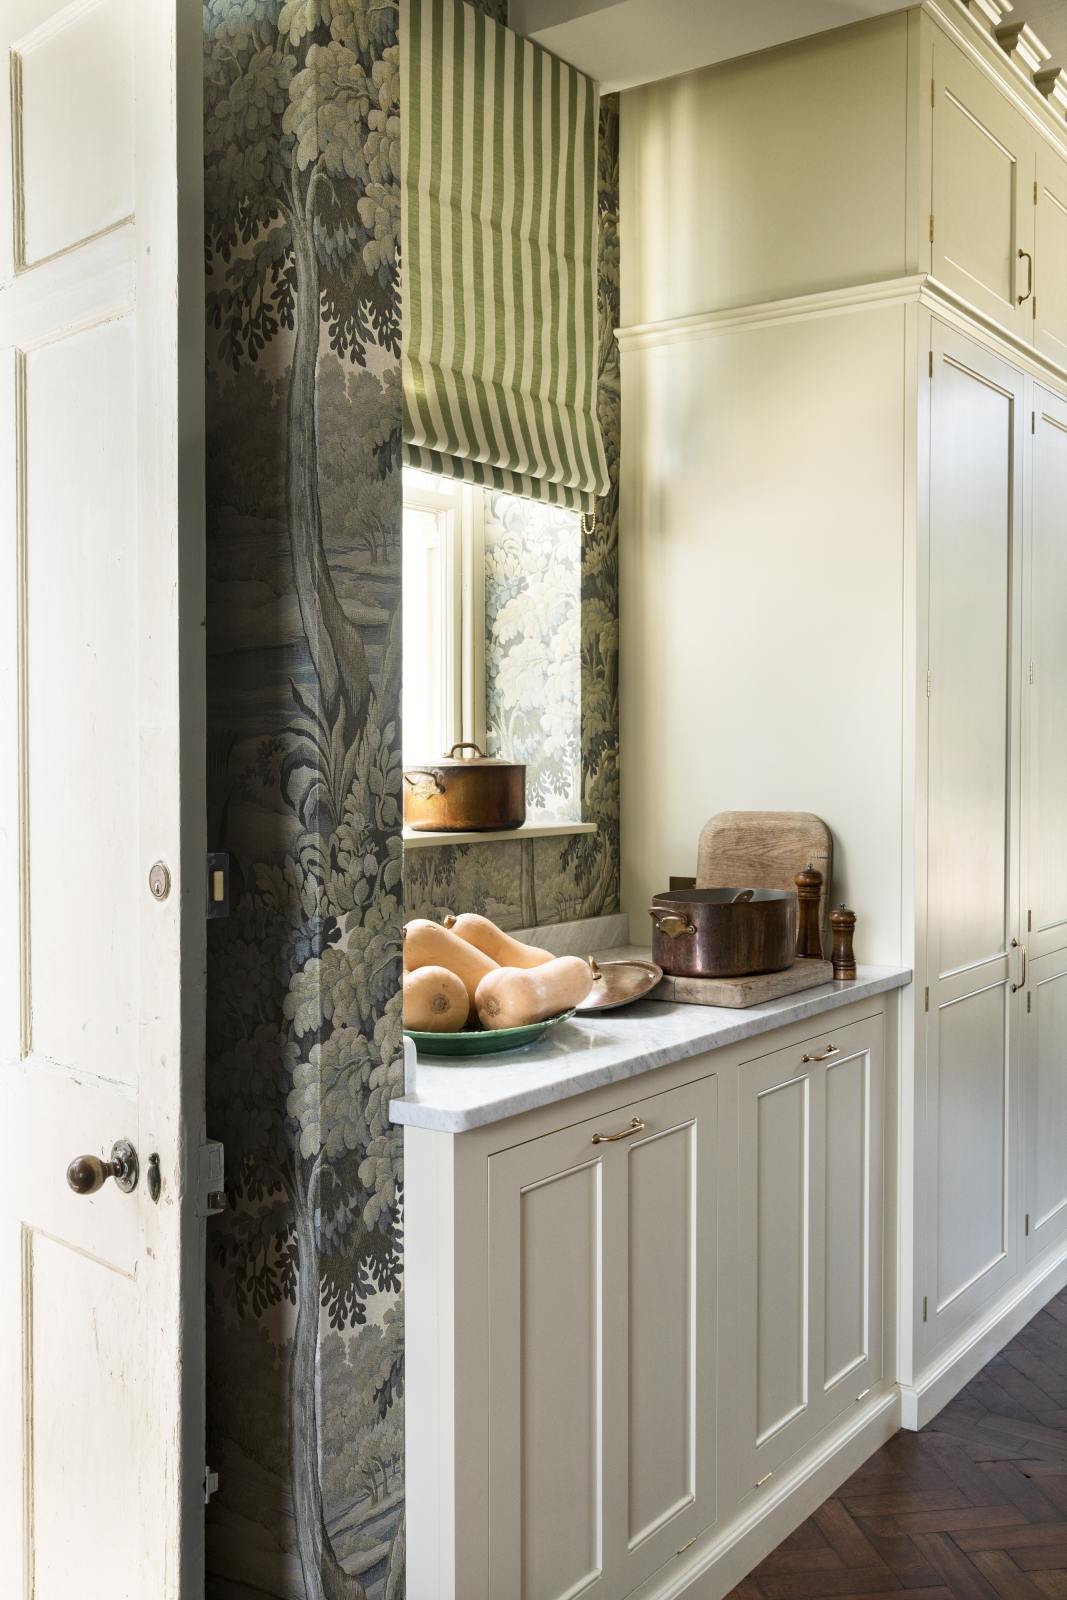 Pale green cabinets, copper hood over Italian range, marble topped Dairy Table, and Plantasia wallpaper in sage in the English country kitchen renovated with deVOL at Castle Trematon by House of Hackney. #devolkitchens #castletrematon